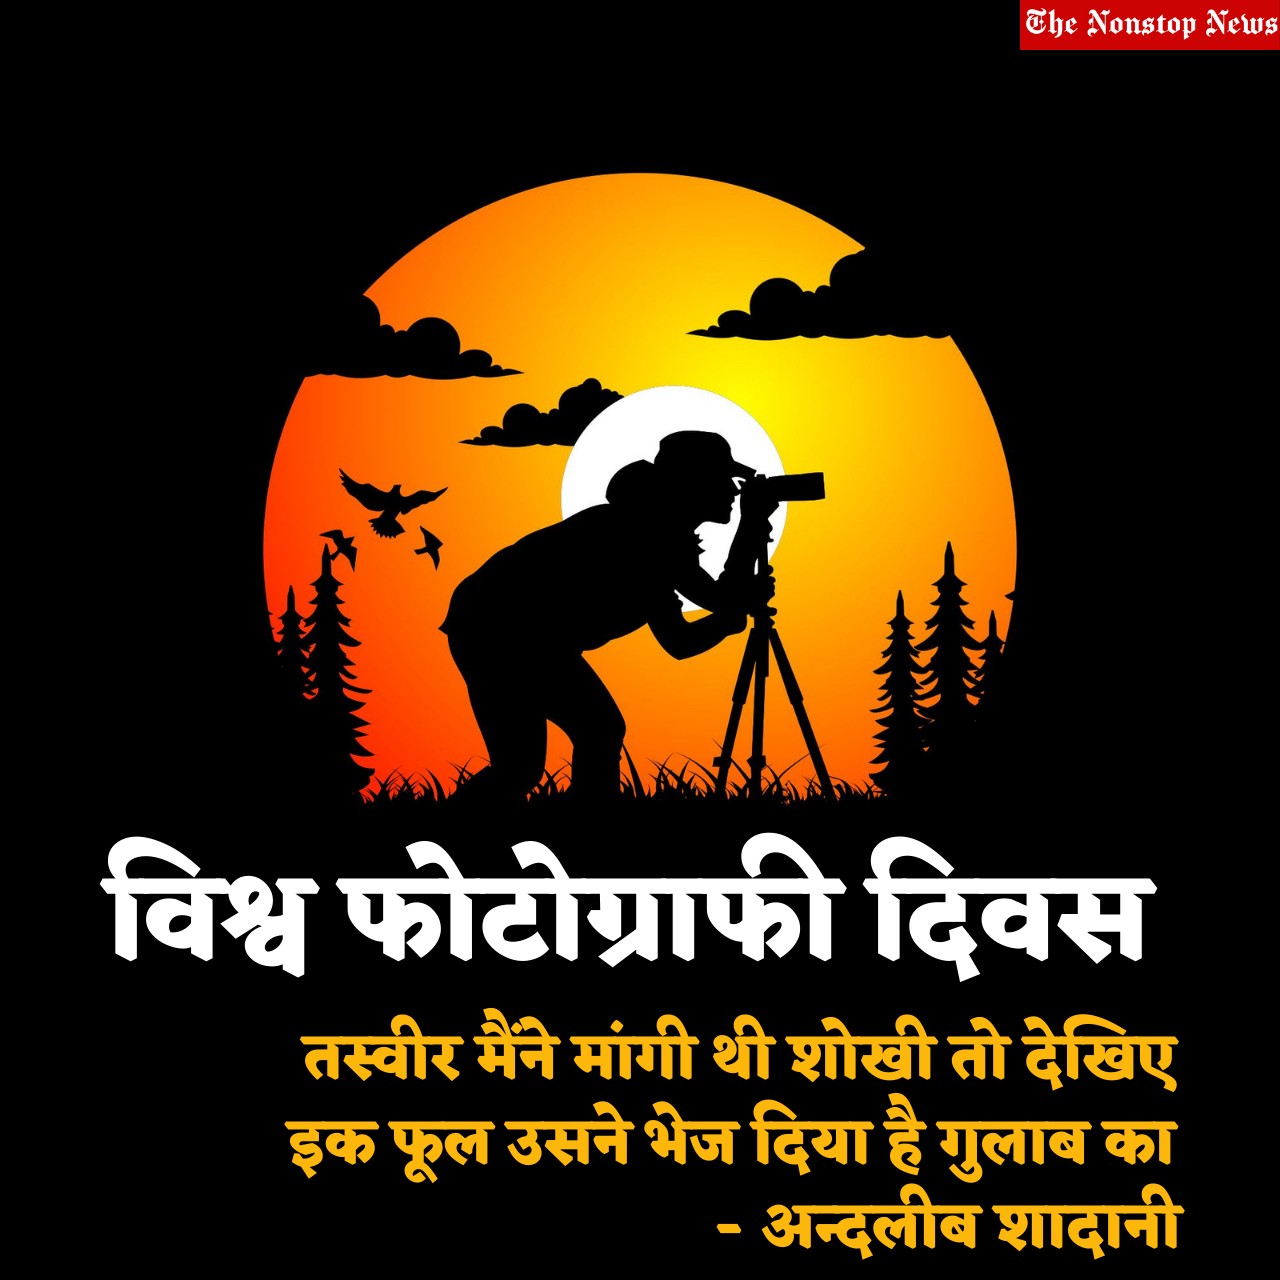 World Photography Day 2021 Hindi Quotes, Messages, Greetings, Shayari, Wishes, and HD Images for Photographers